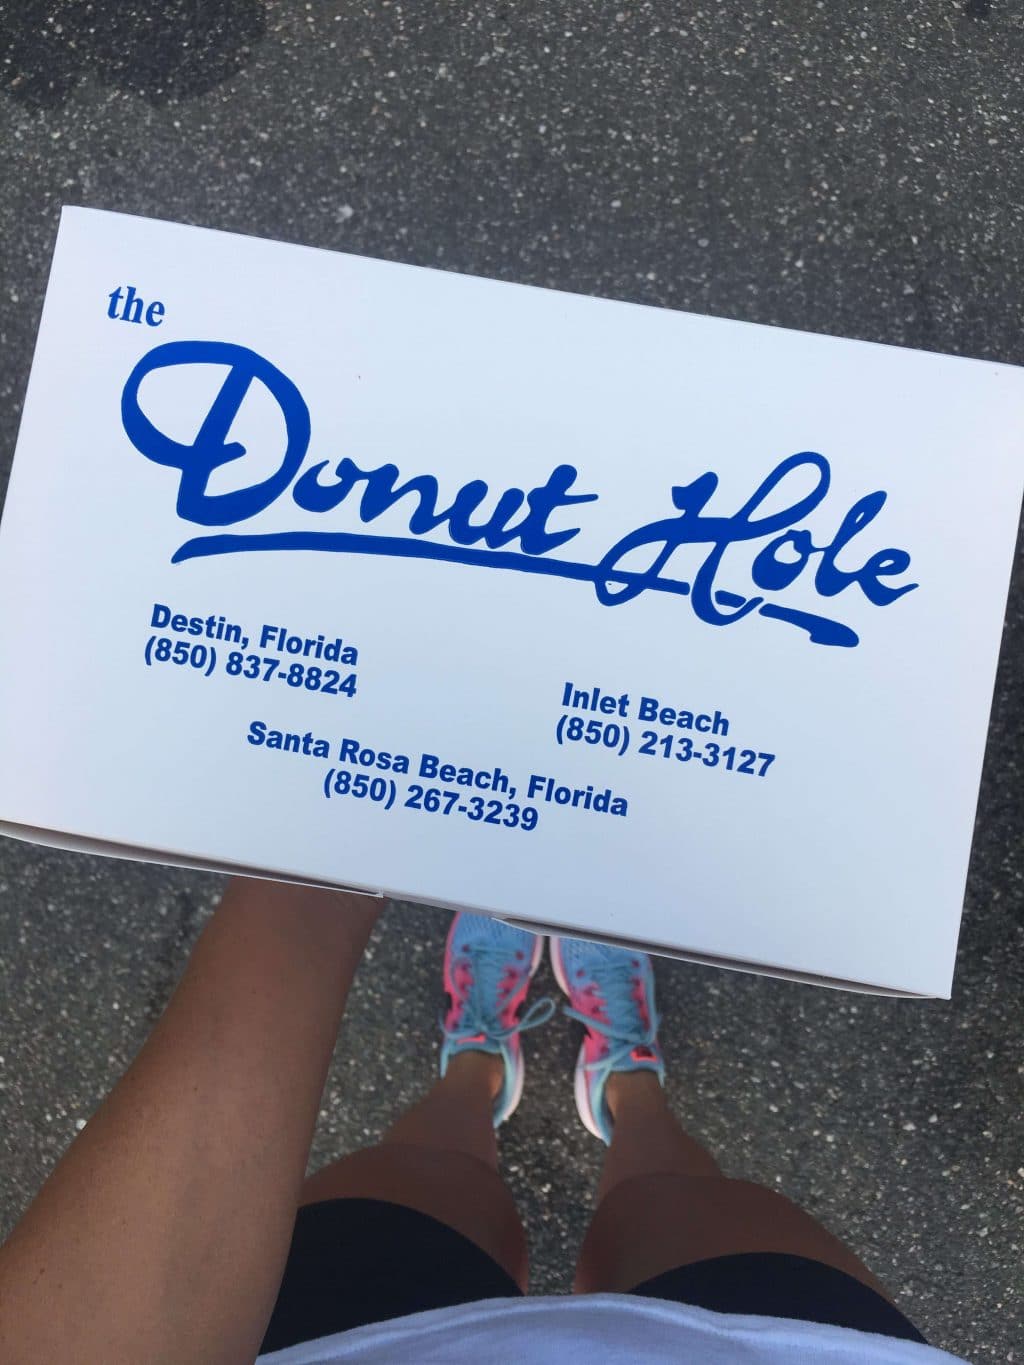 Donut Hole Sandestin, Florida, 30A vacation favorites, stilettos and diapers